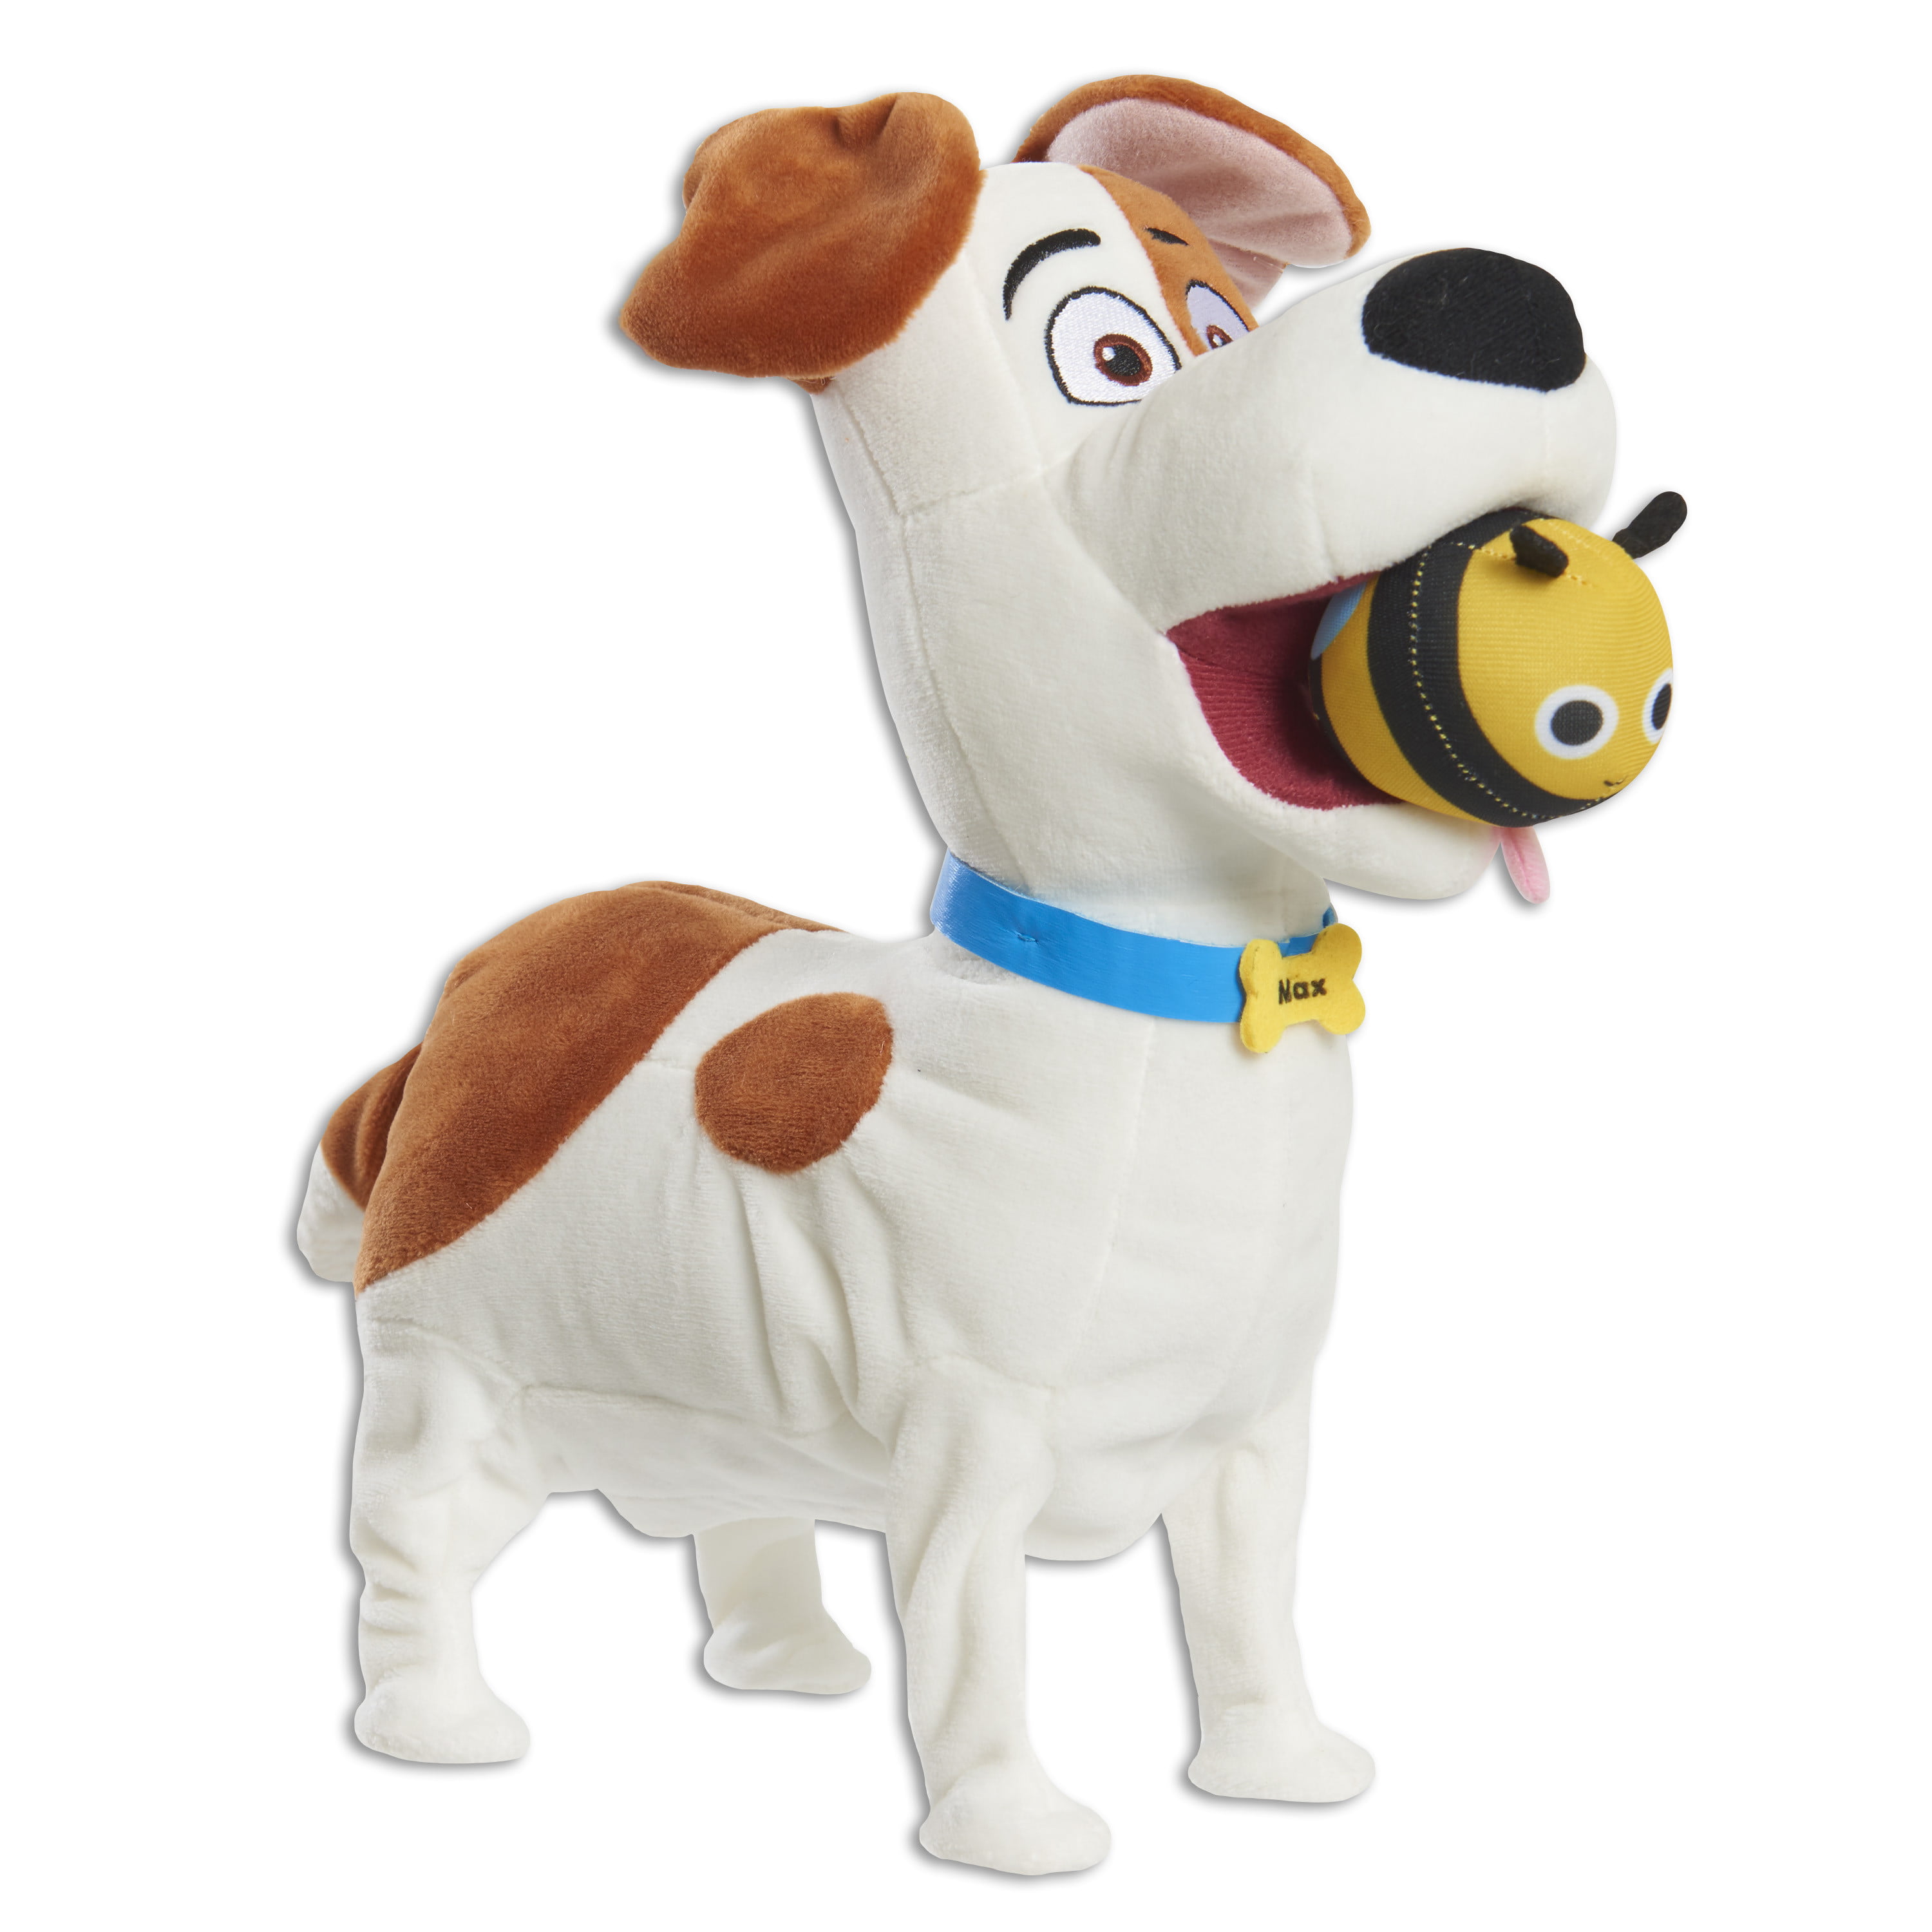 NEW OFFICIAL 12"  SECRET LIFE OF PETS 2 STANDING MAX  SOFT PLUSH TOY AND MUG 